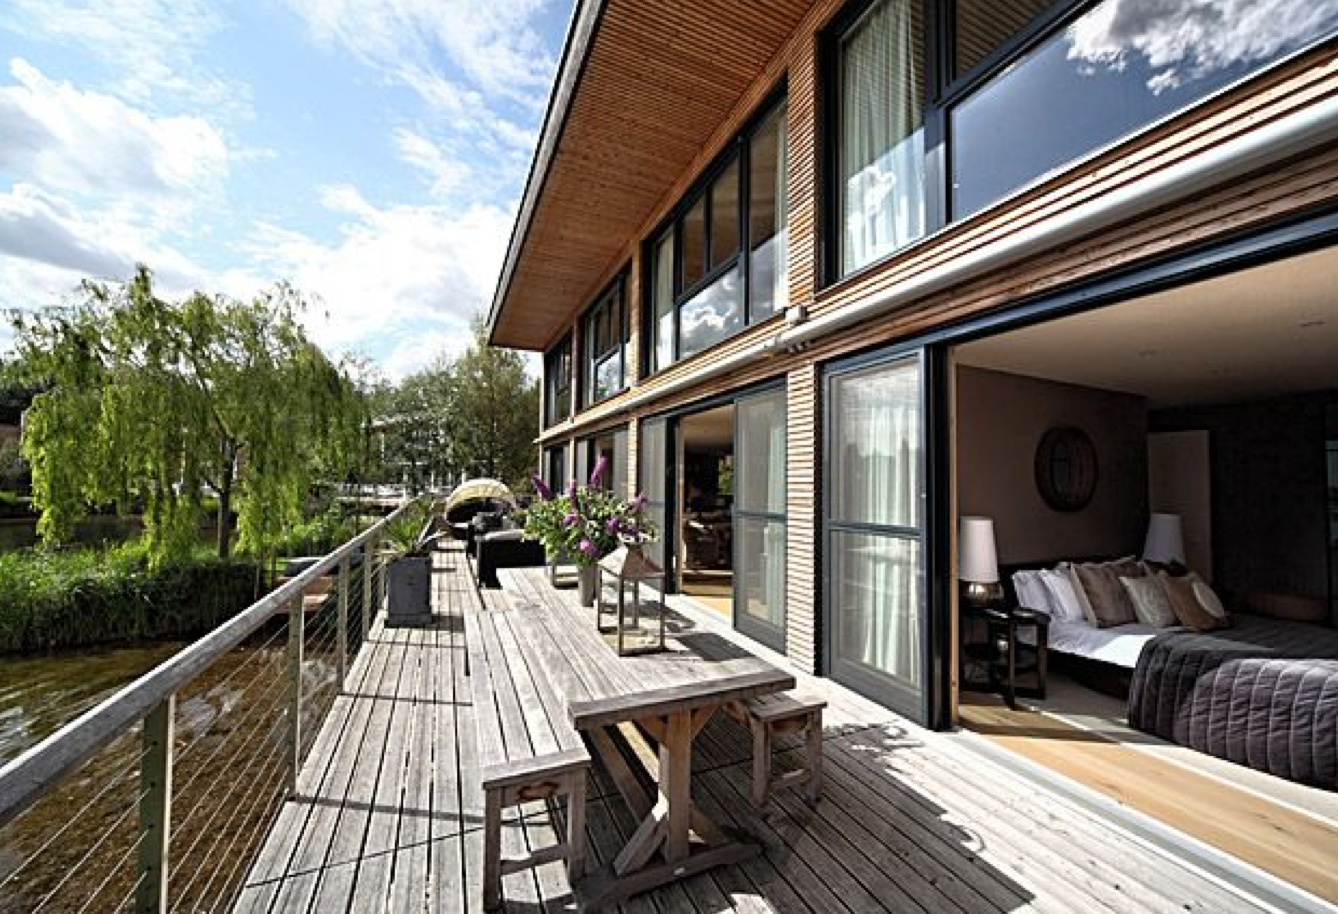 Introducing Glass House: A Spacious Lakeside Cotswold Holiday Home